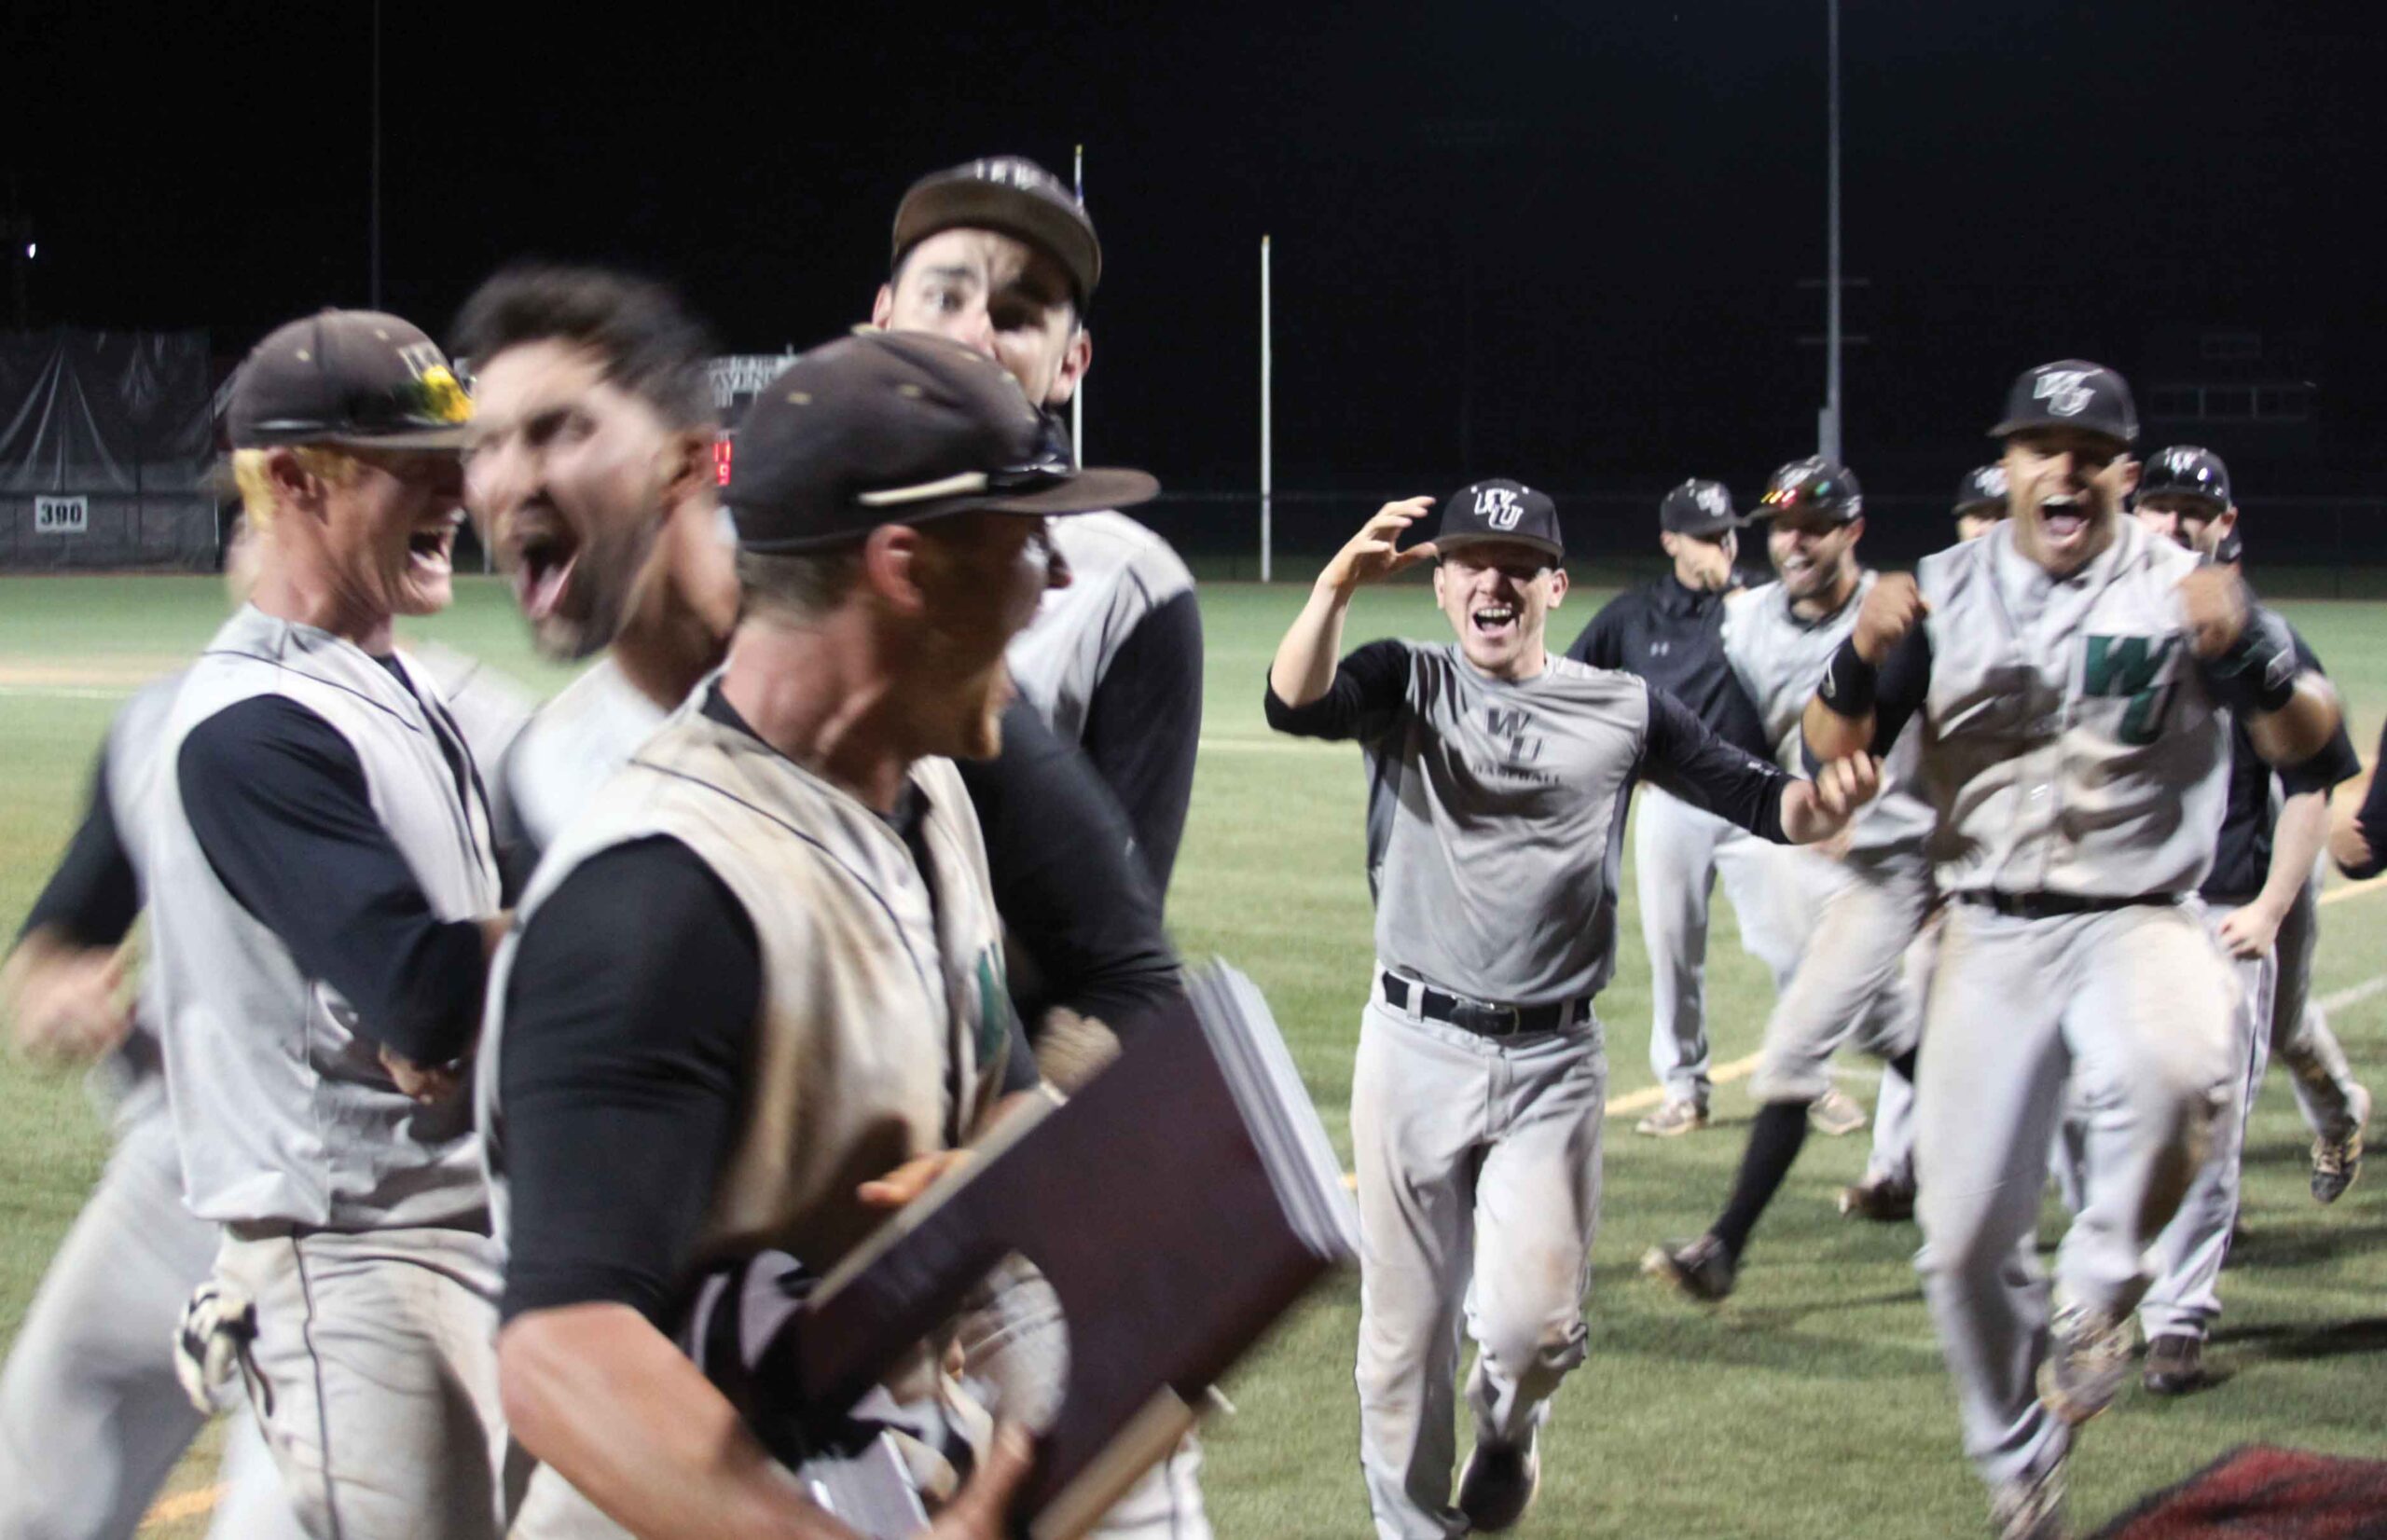 Baseball players cheering in excitement